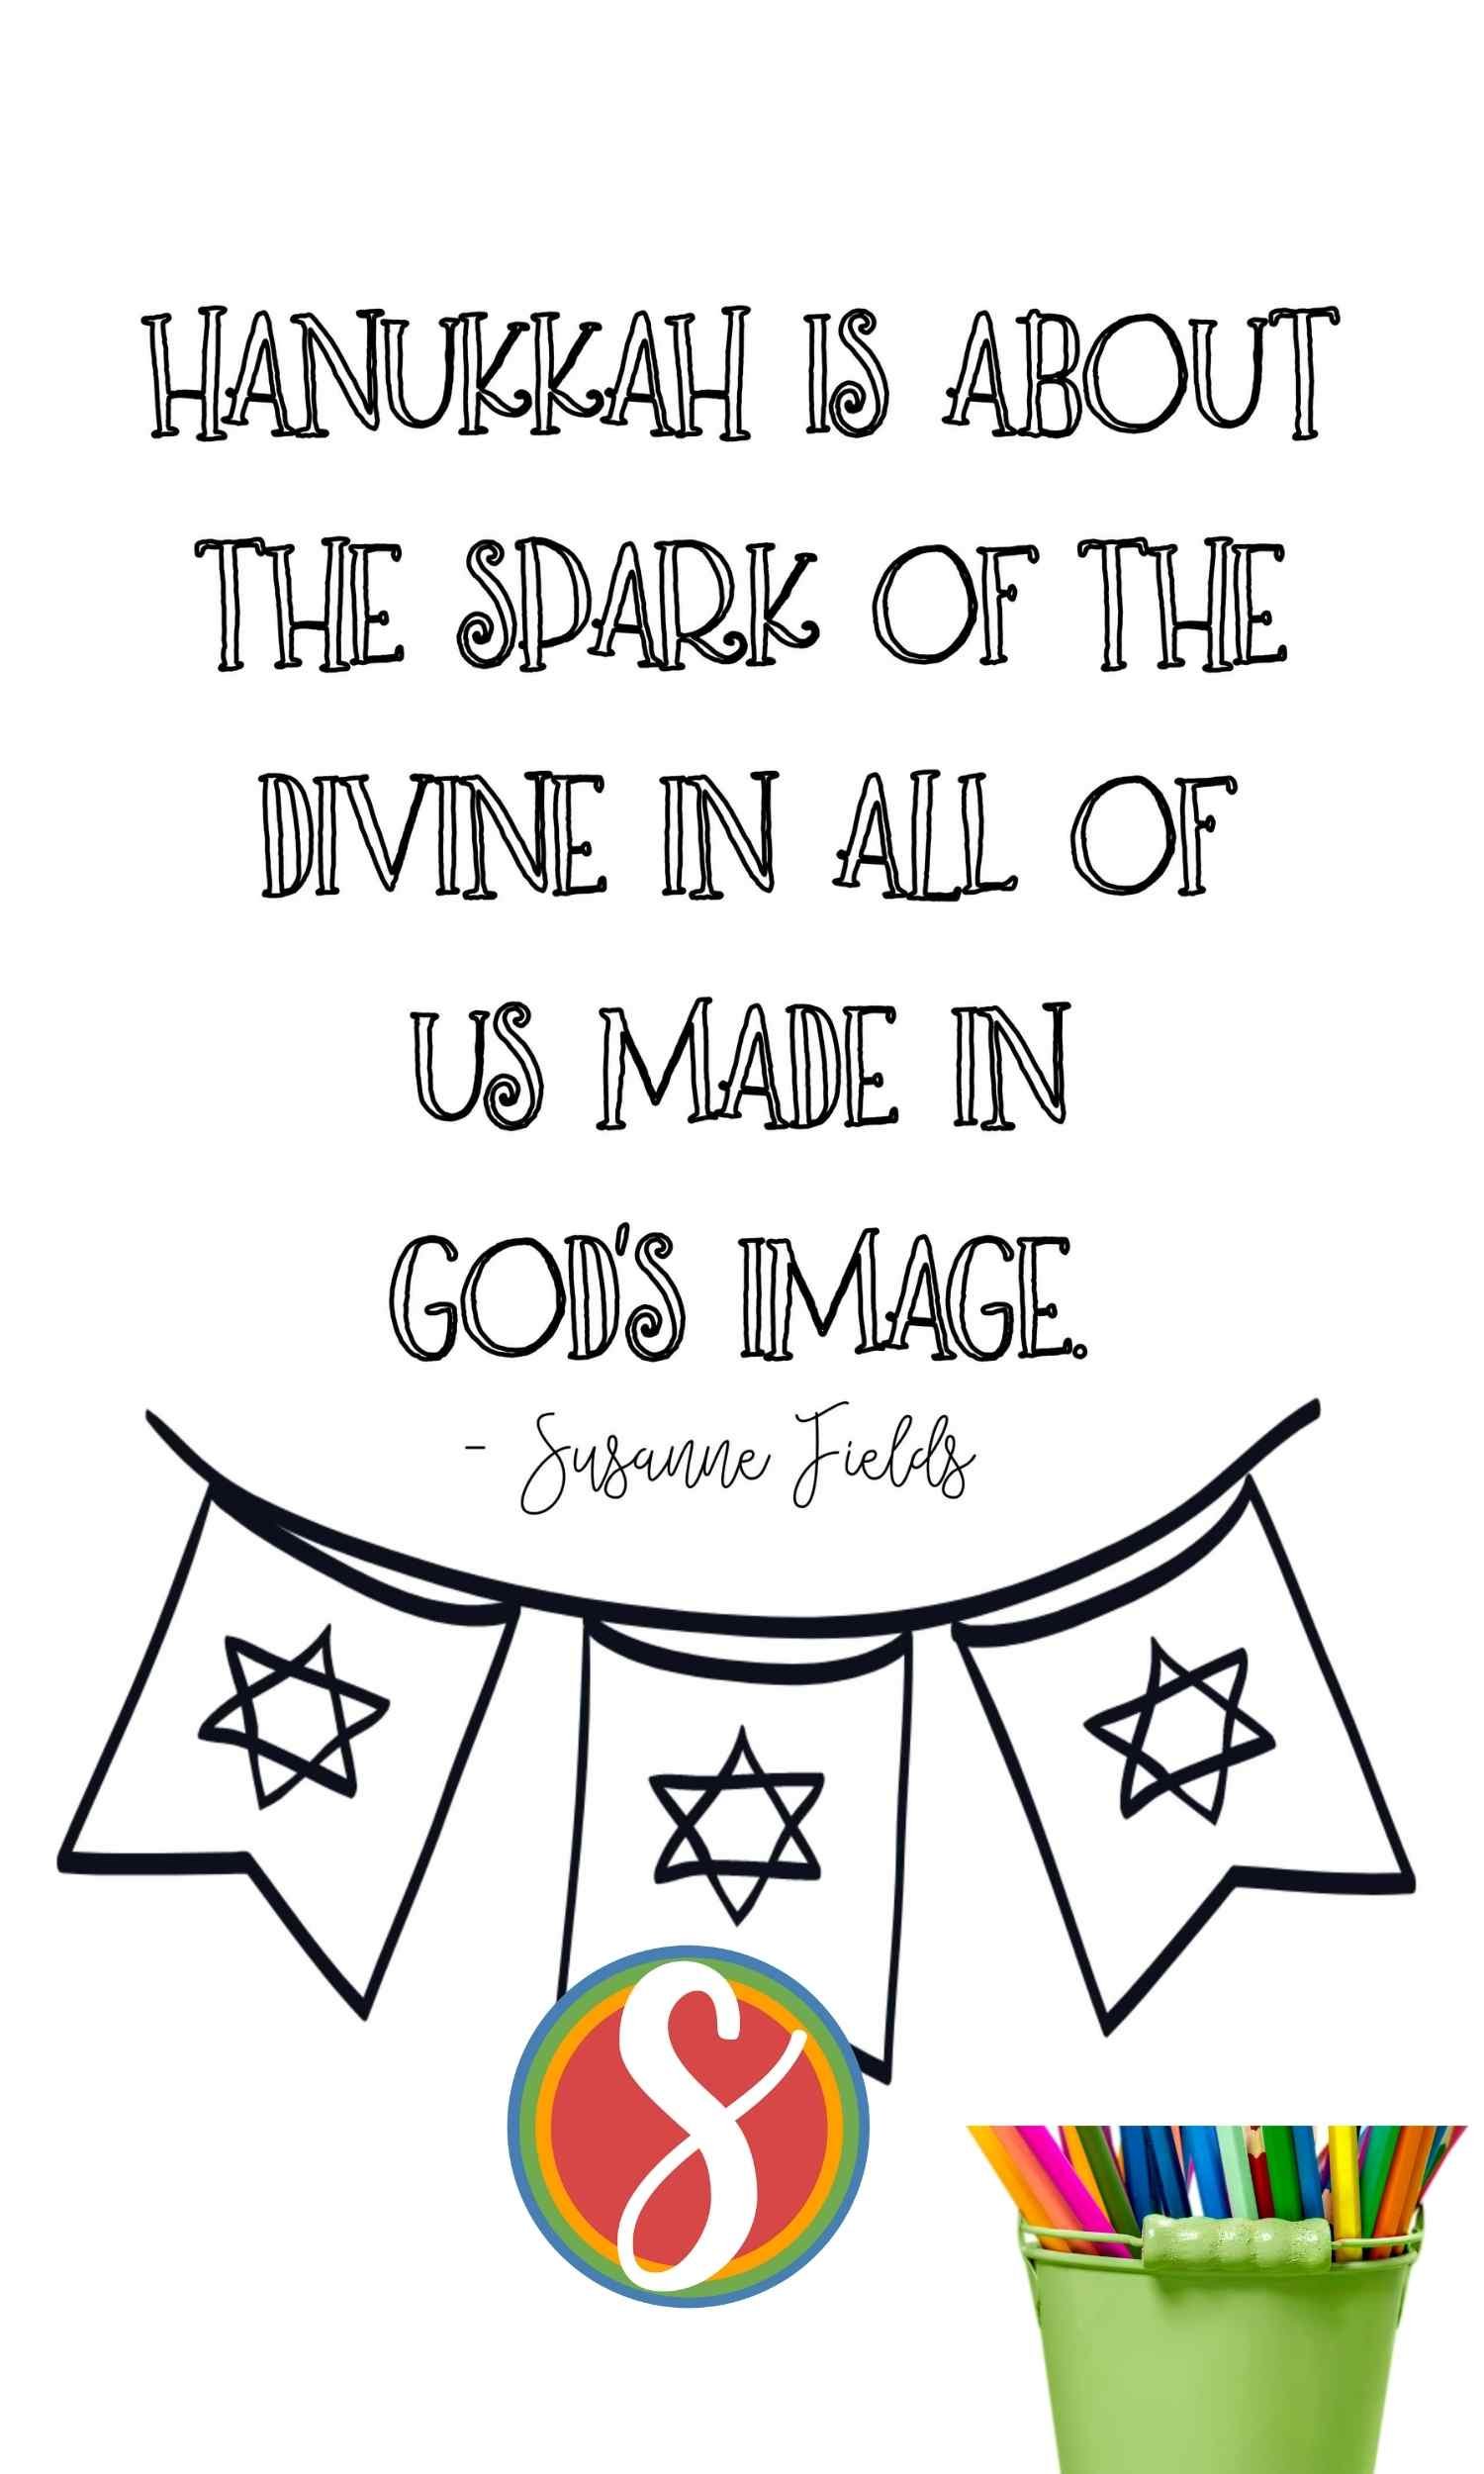 susanne fields quote about hanukkah, colorable, with star of david banner underneath